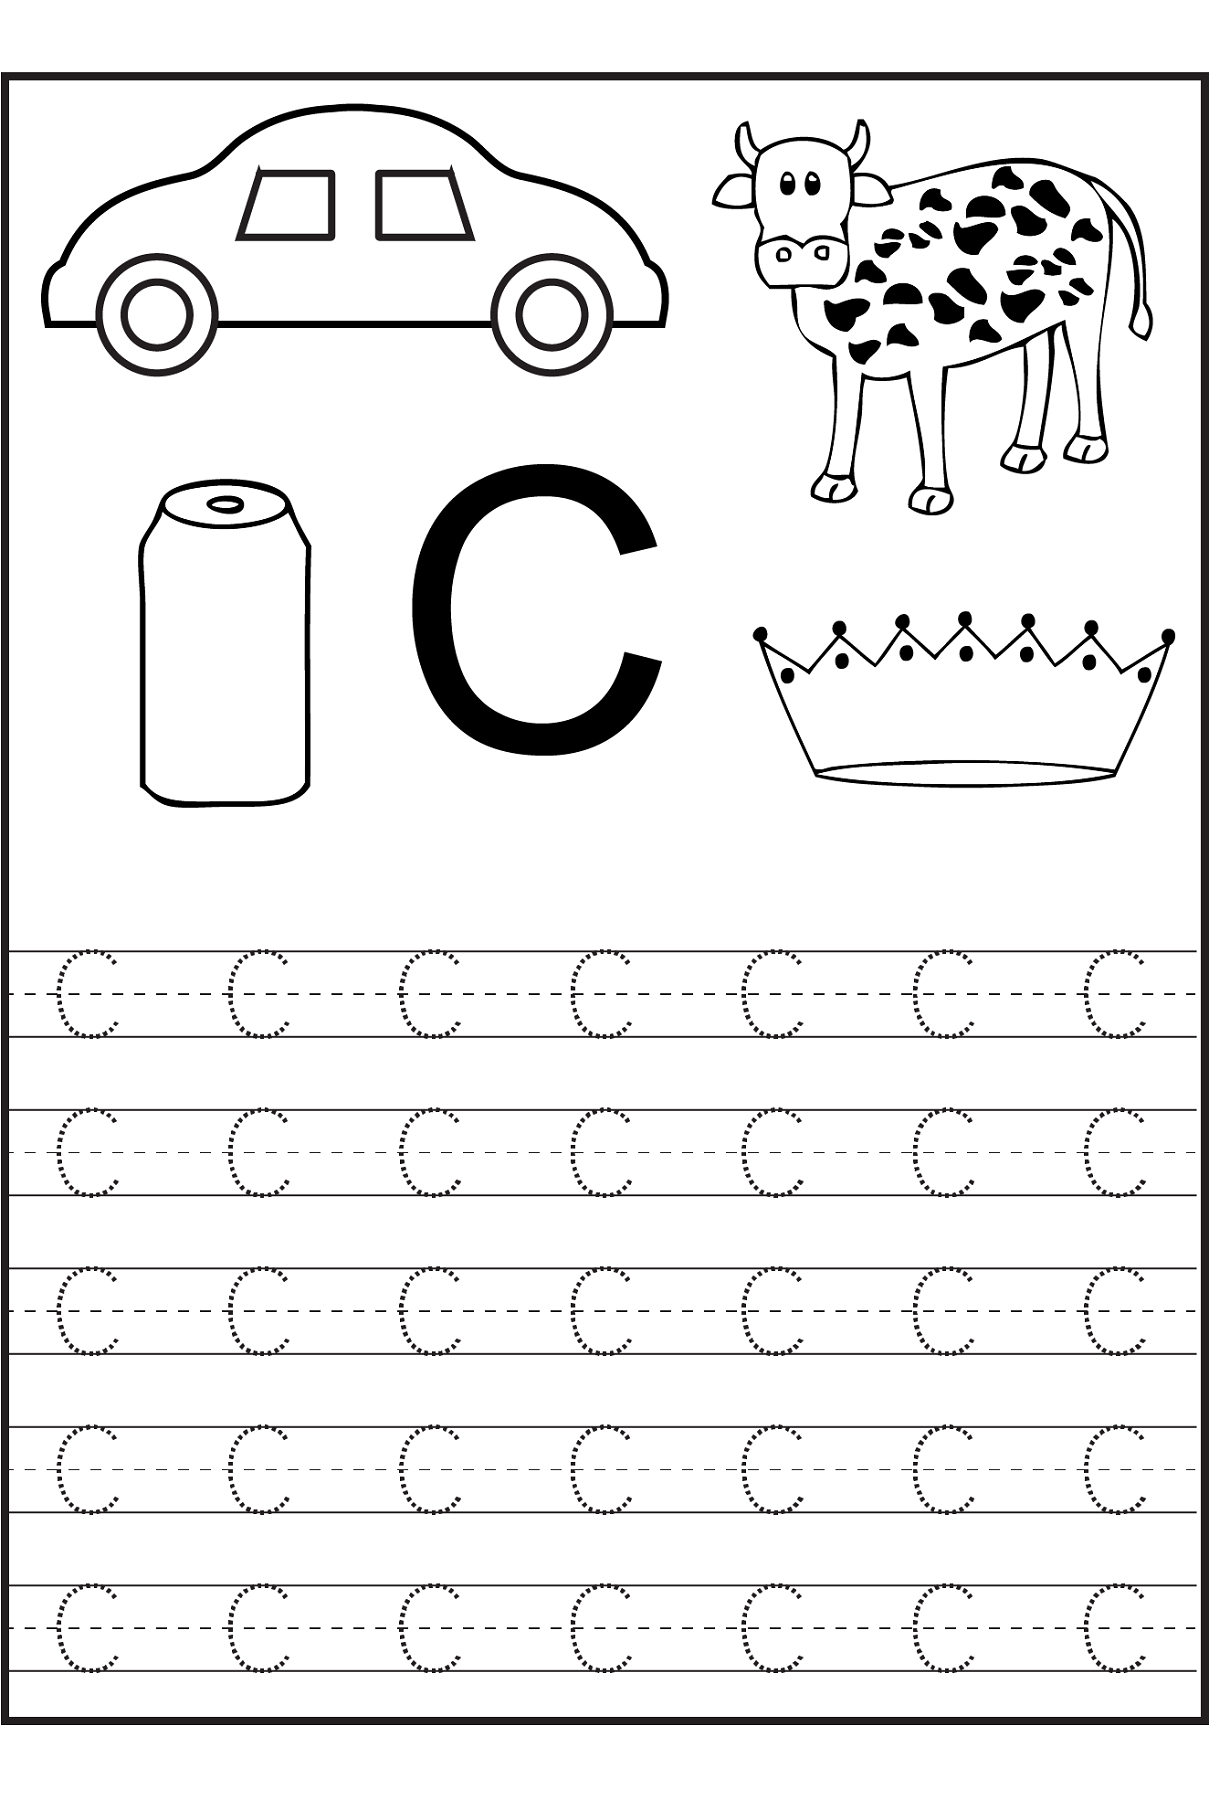 Trace The Letter C Worksheets | Preschool Worksheets, Letter throughout Letter C Worksheets For 2 Year Olds